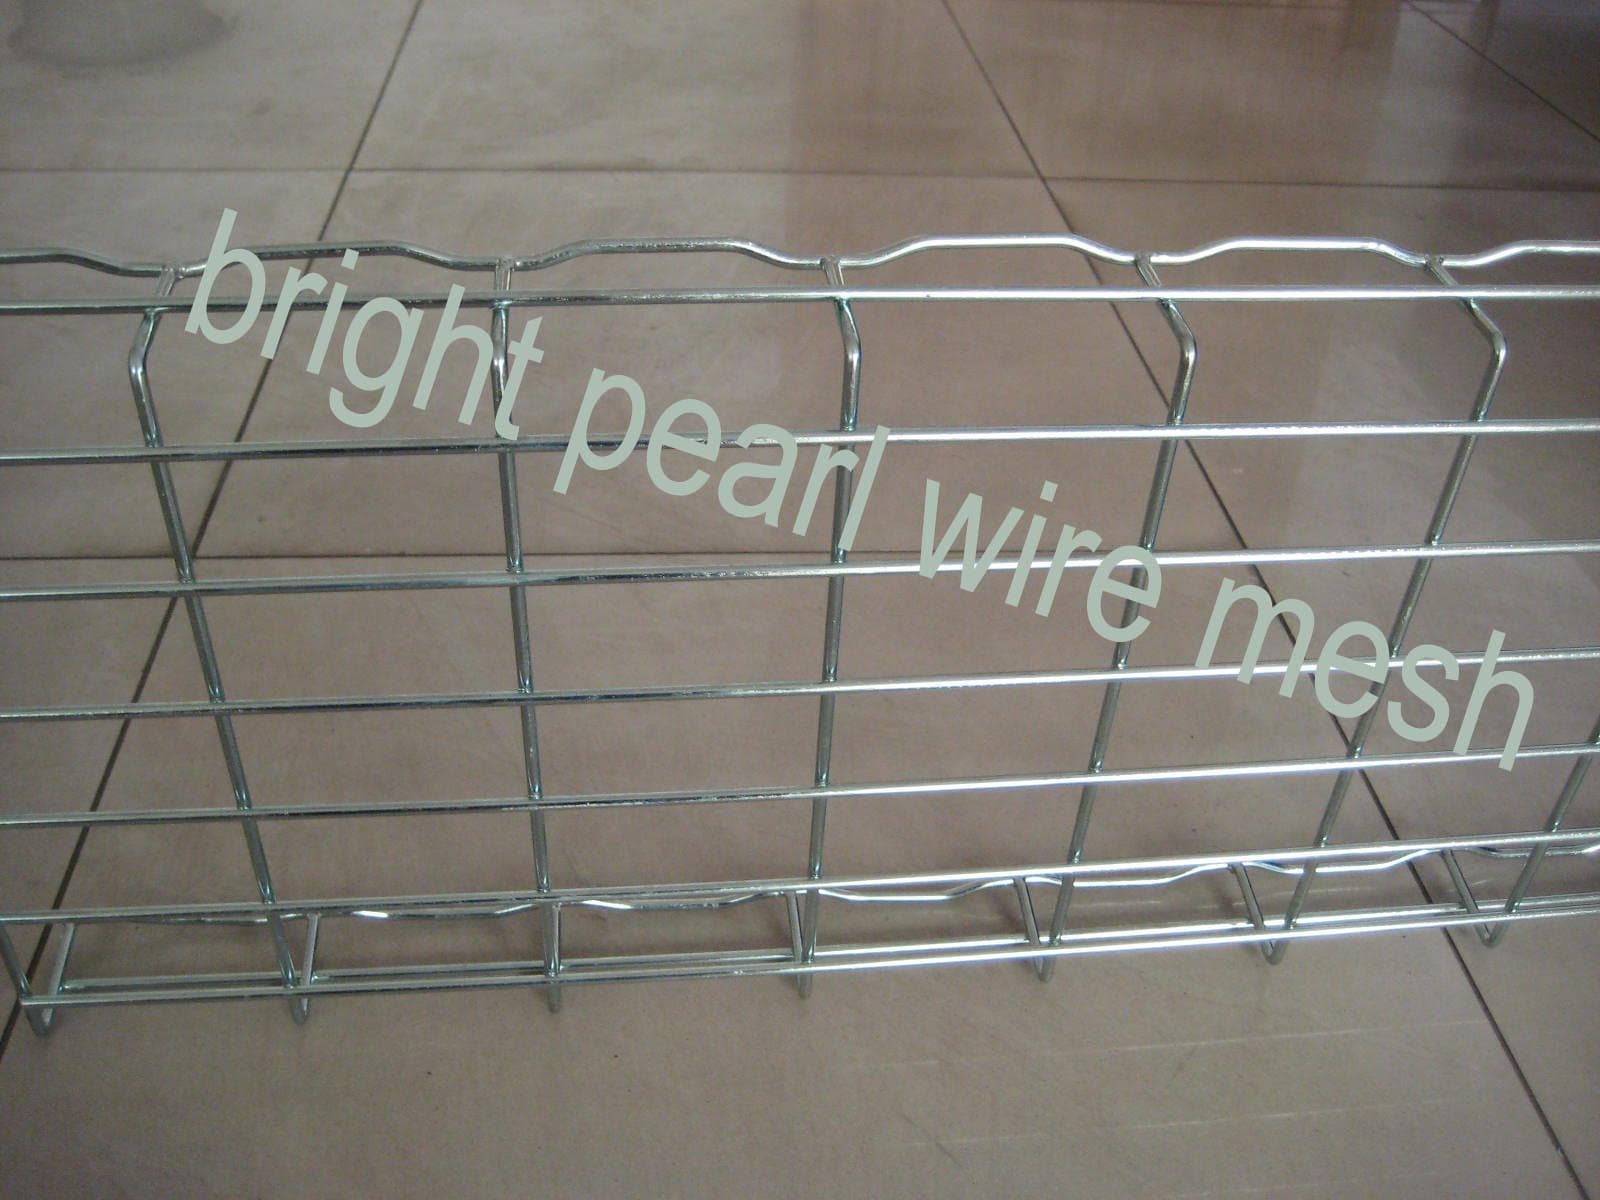 wire mesh cable tray, wire mesh cable support, wire basket cable tray, wire mesh cable bridge